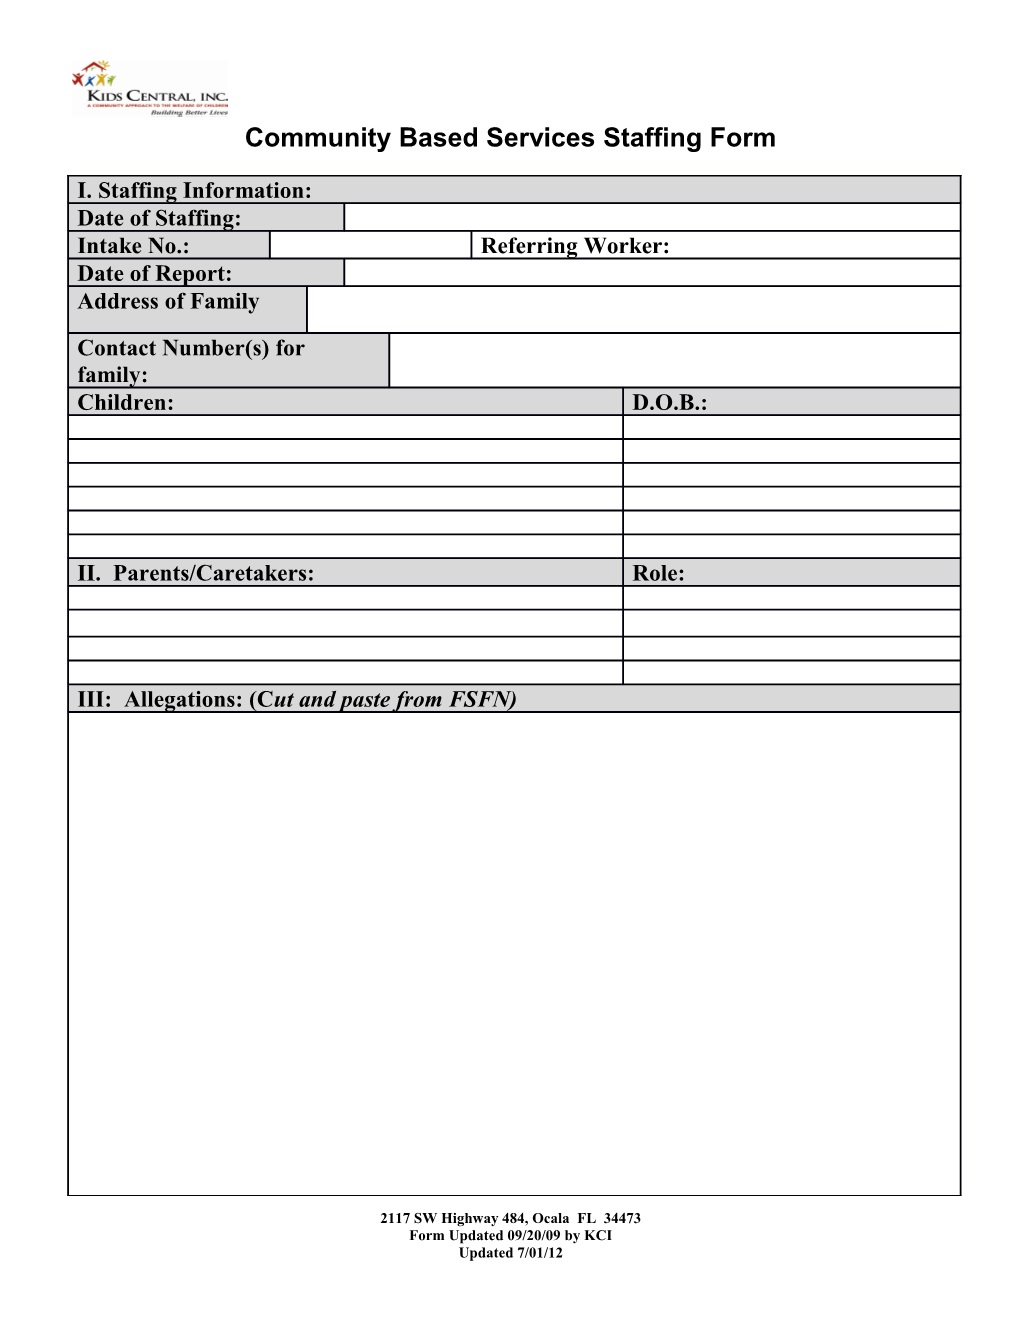 Community Based Services Staffing Form